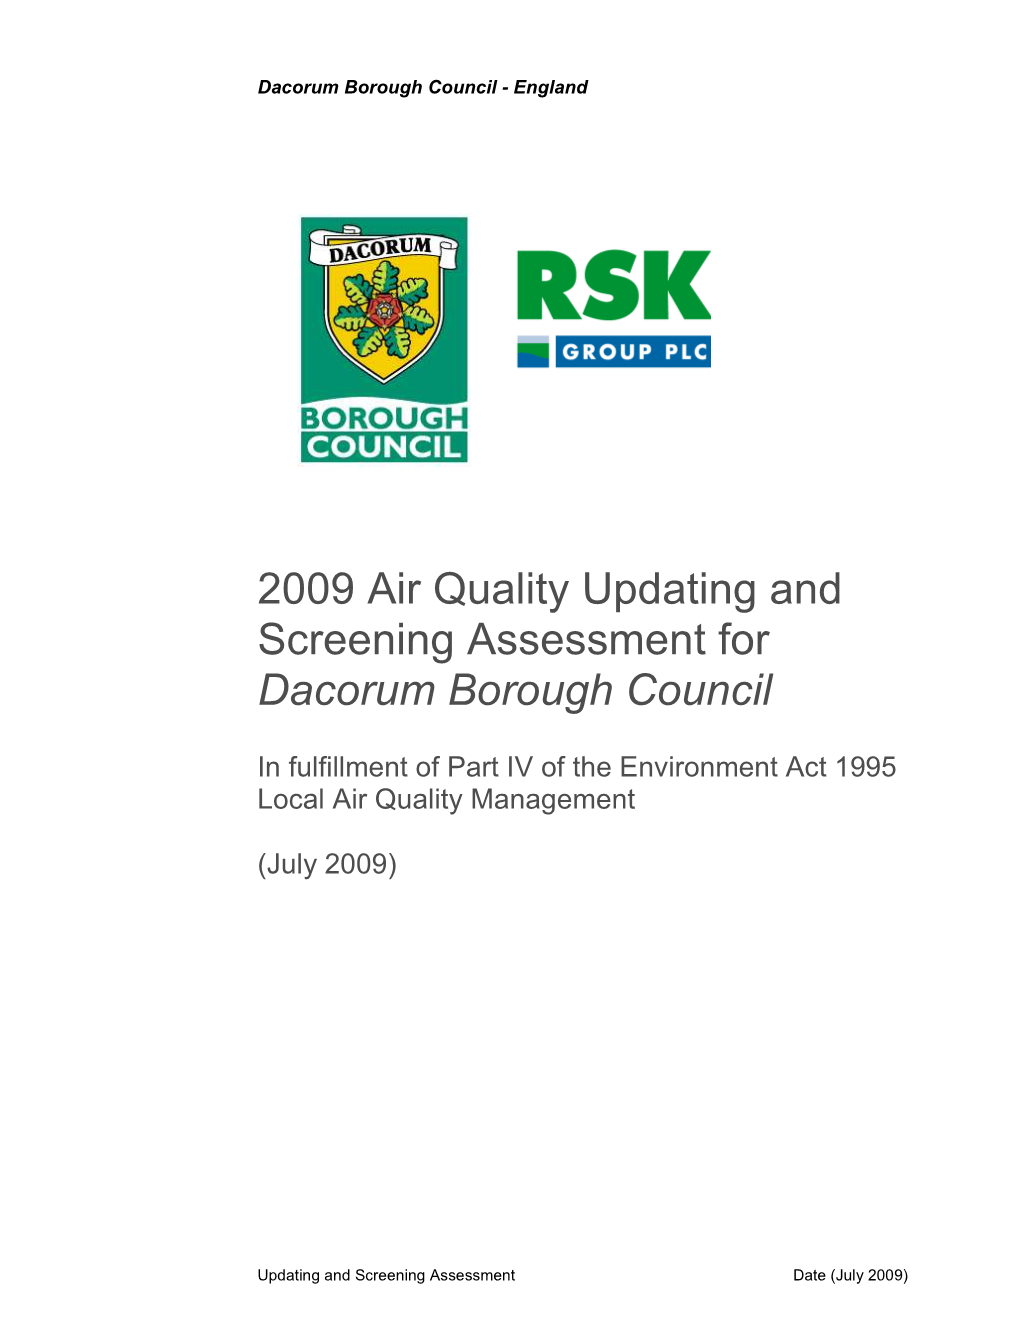 2009 Air Quality Updating and Screening Assessment for Dacorum Borough Council